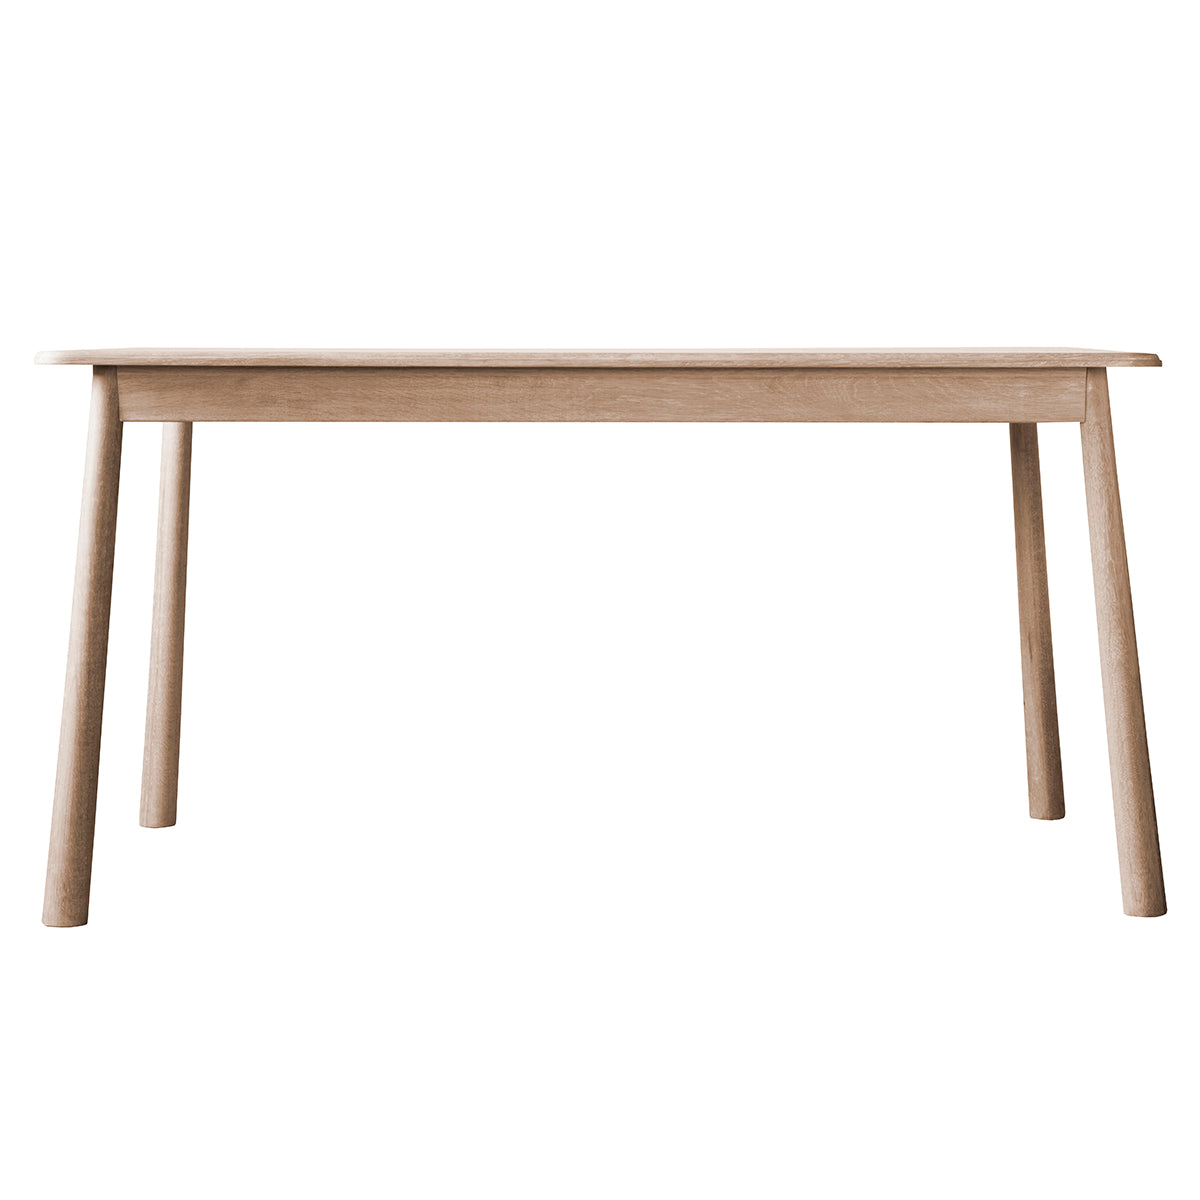 A Tigley Dining Table by Kikiathome.co.uk, perfect for home furniture and interior decor.